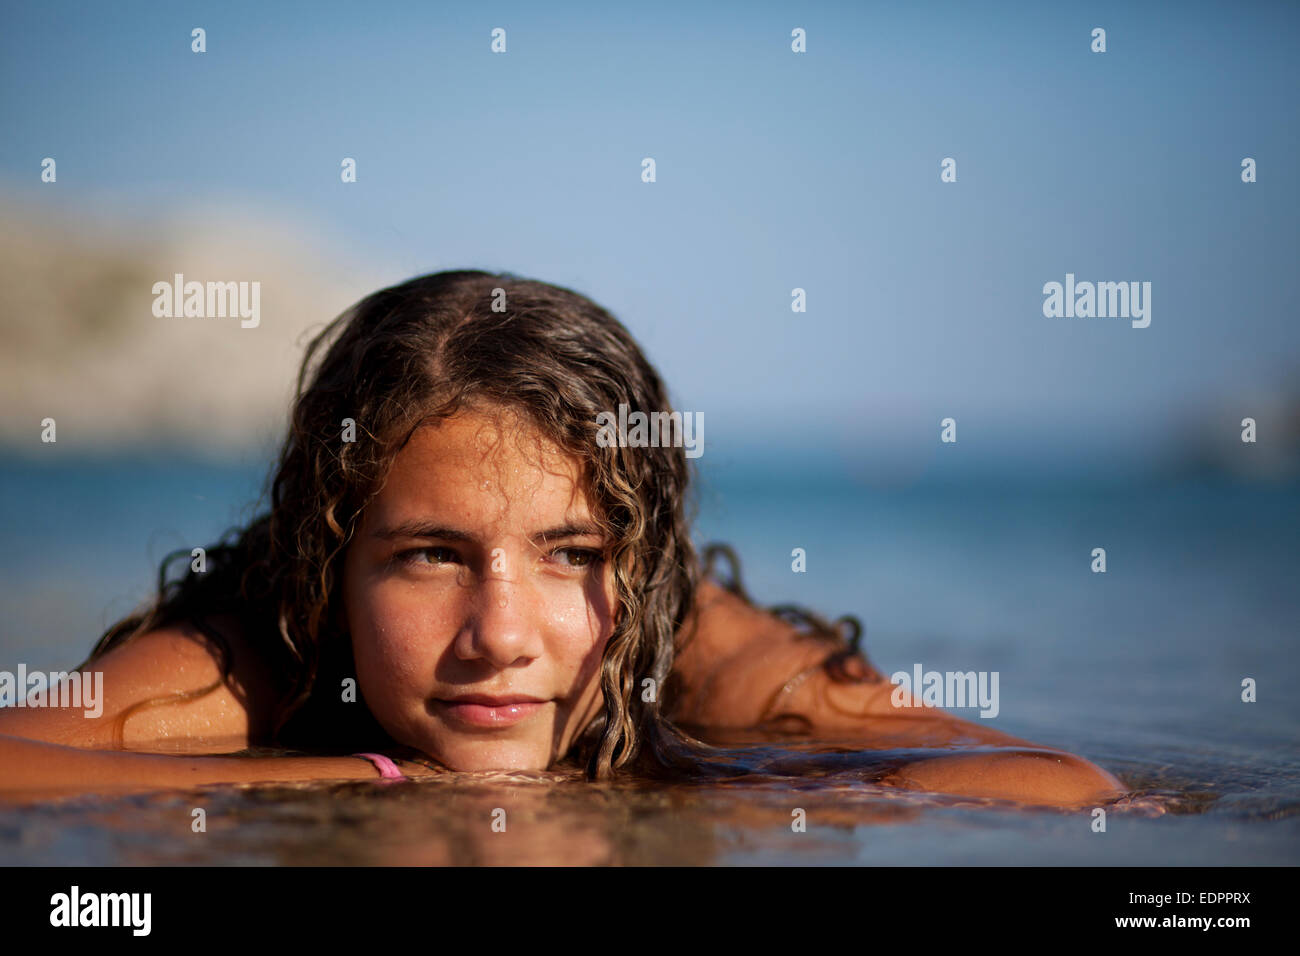 Beautiful teenager girl at the shore daydreaming in the water Stock Photo